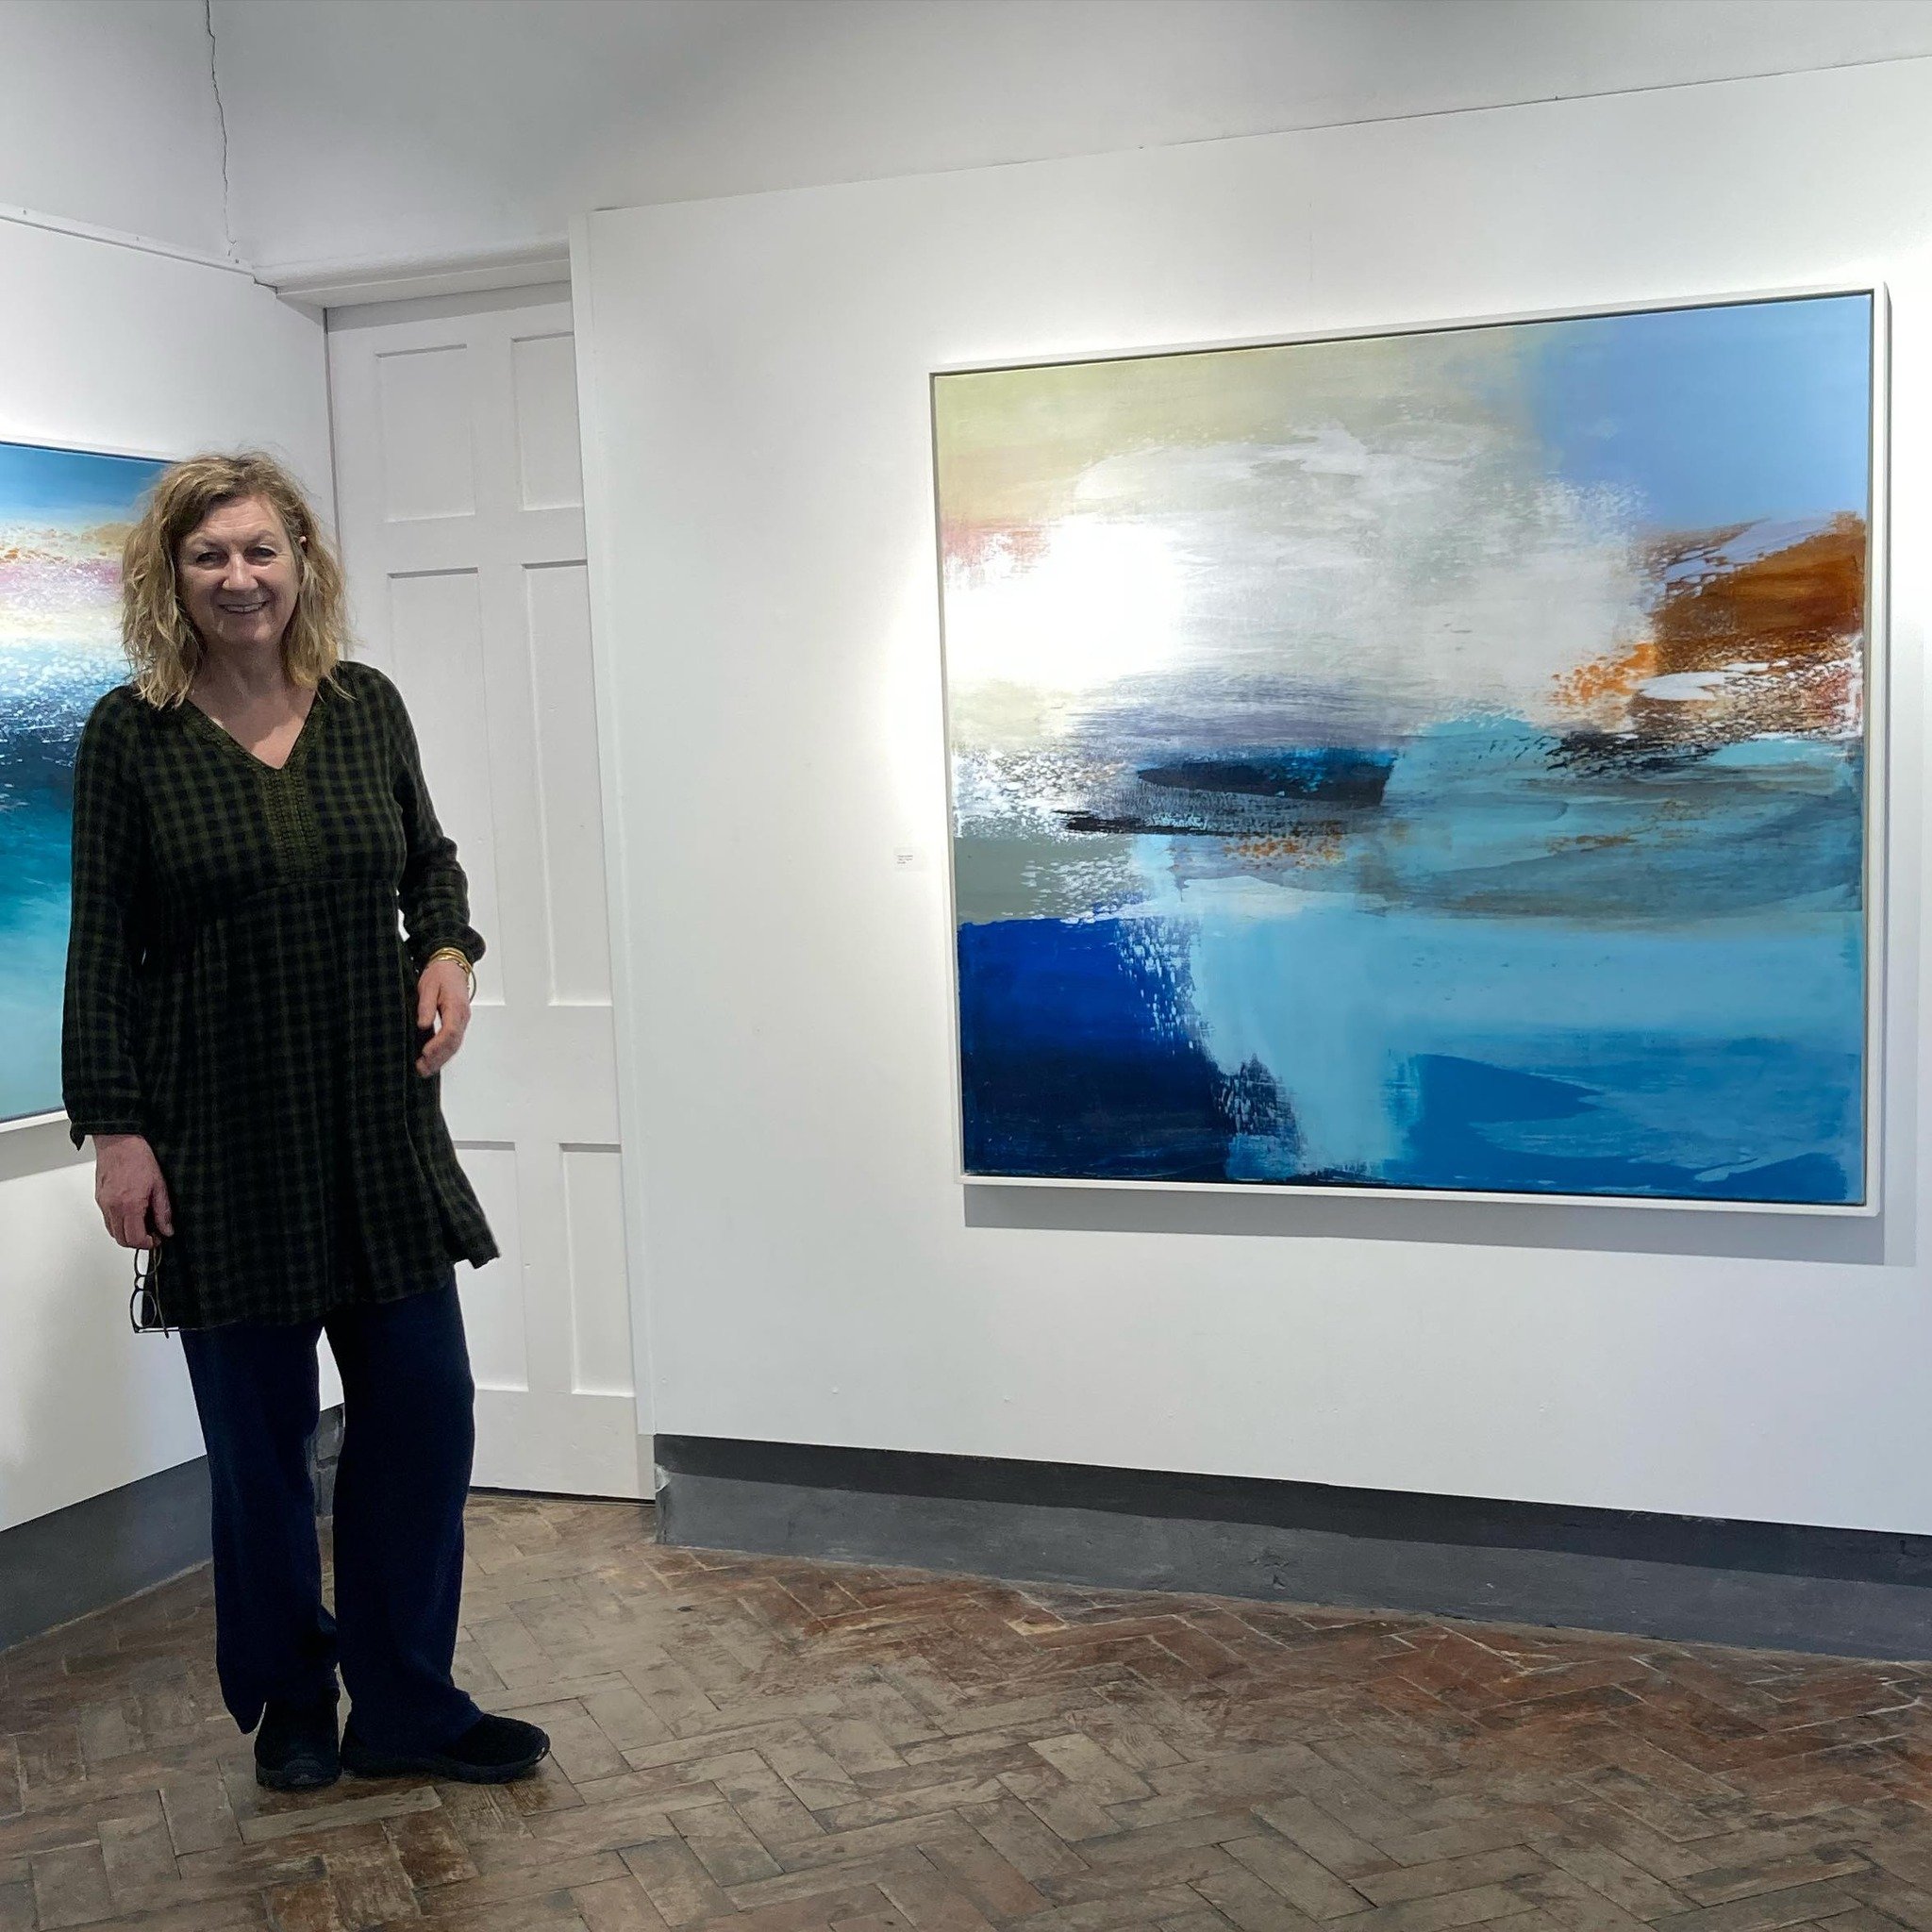 I visited my Friend Heather Mcalpine #heathermcalpineartist this morning as she opened her incredibly beautiful exhibition at the Crypt Gallery St Ives. The show is on for another few days and is the most breathtaking evocation of the light here in S